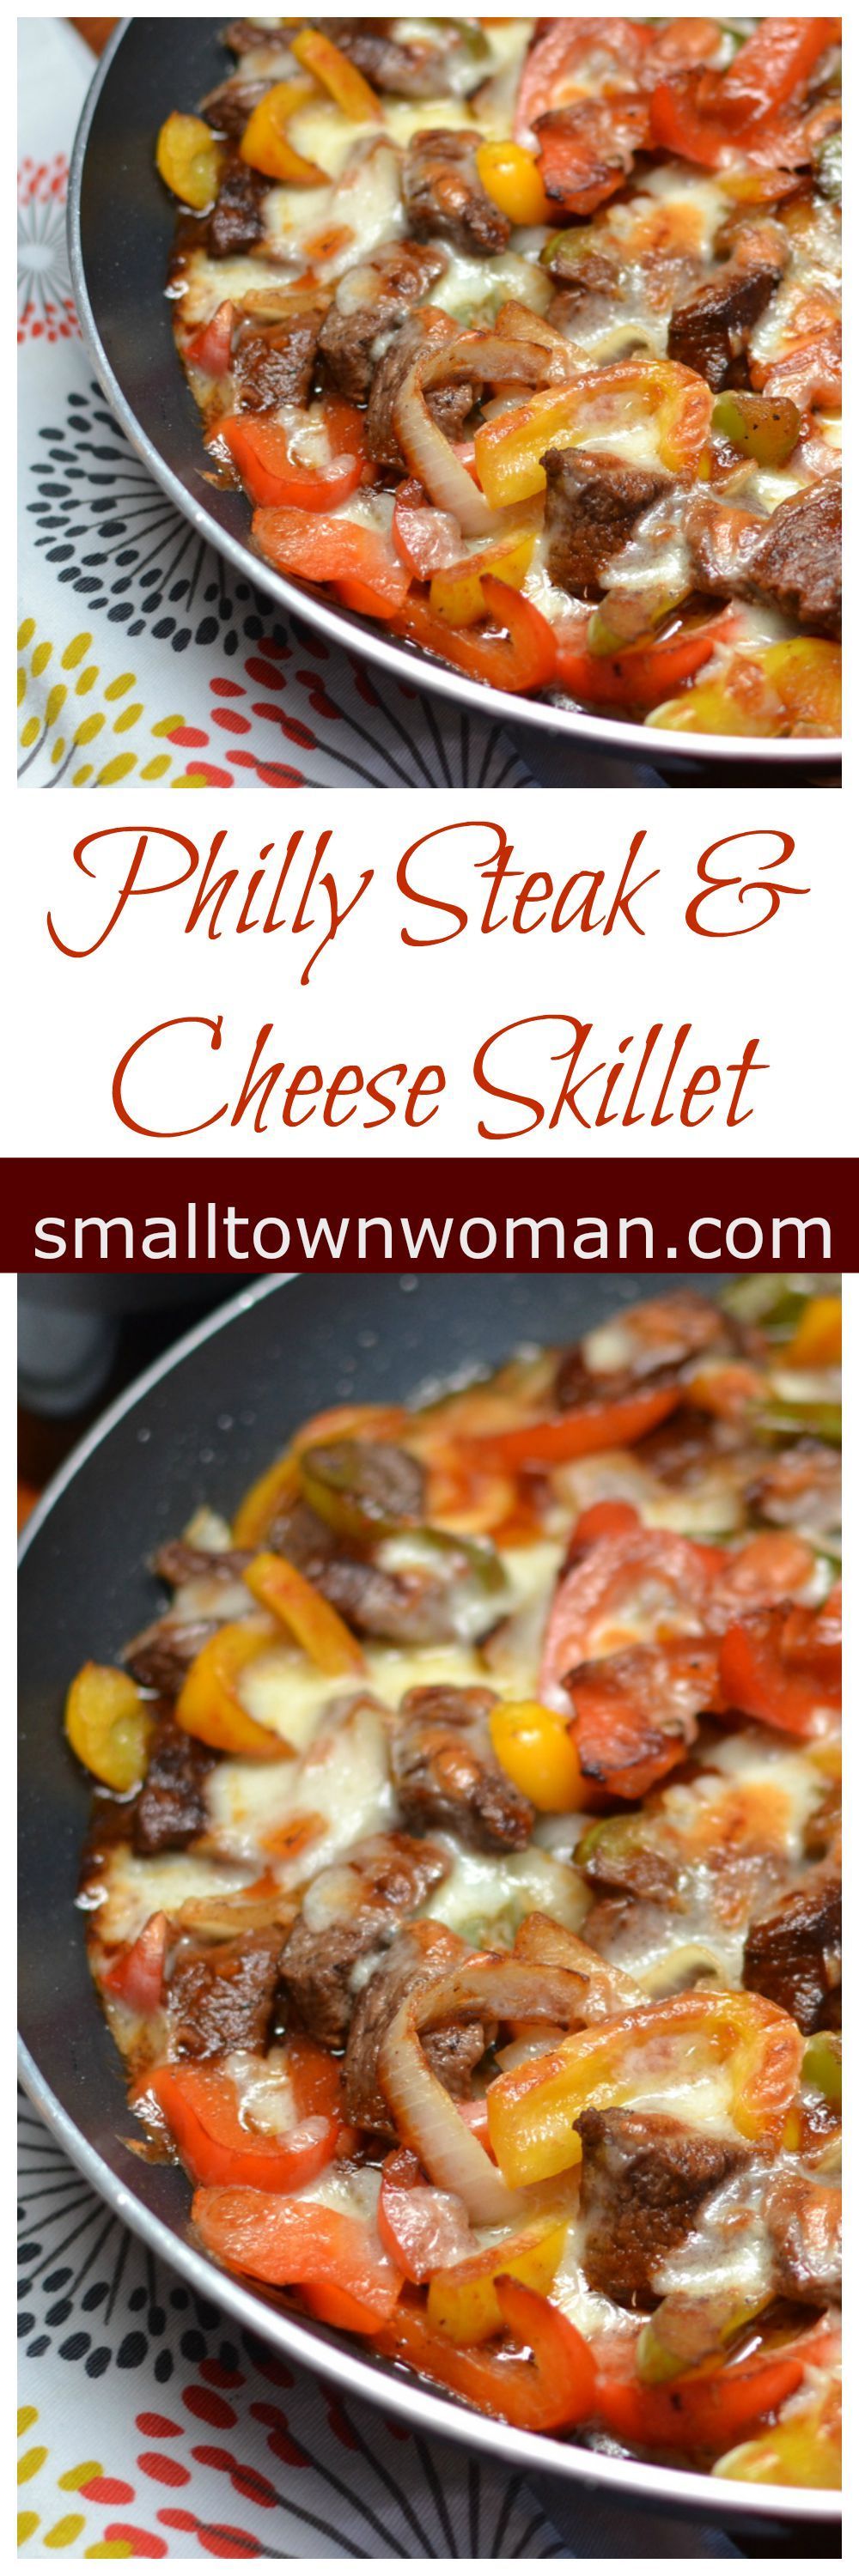 Do you like Philly Steak & Cheese but don’t need or want the carbs! Here is your solution! This is fabulously delicious and